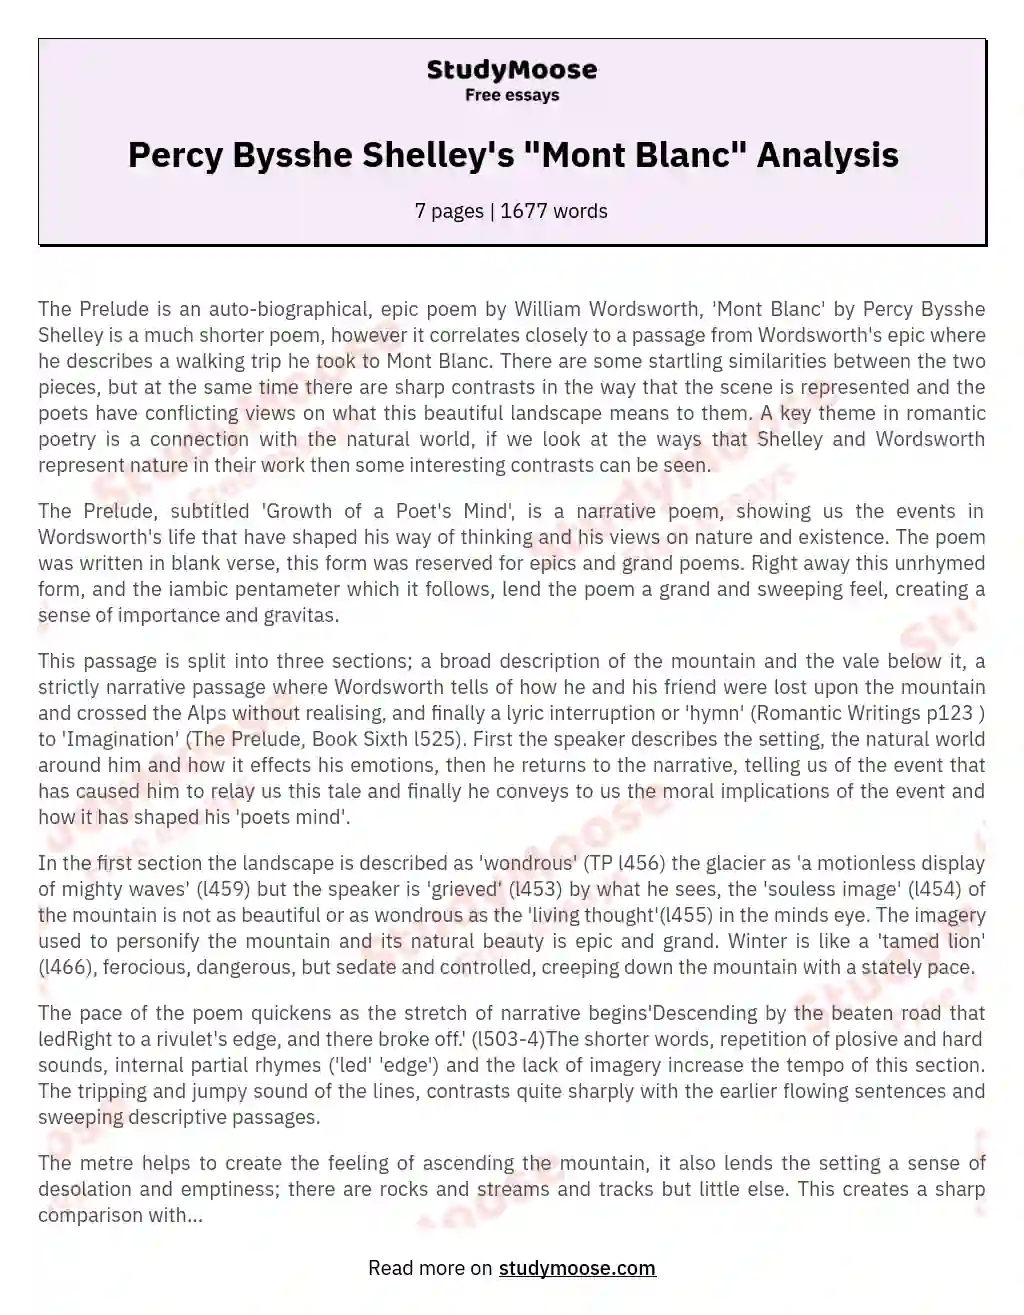 Percy Bysshe Shelley's "Mont Blanc" Analysis